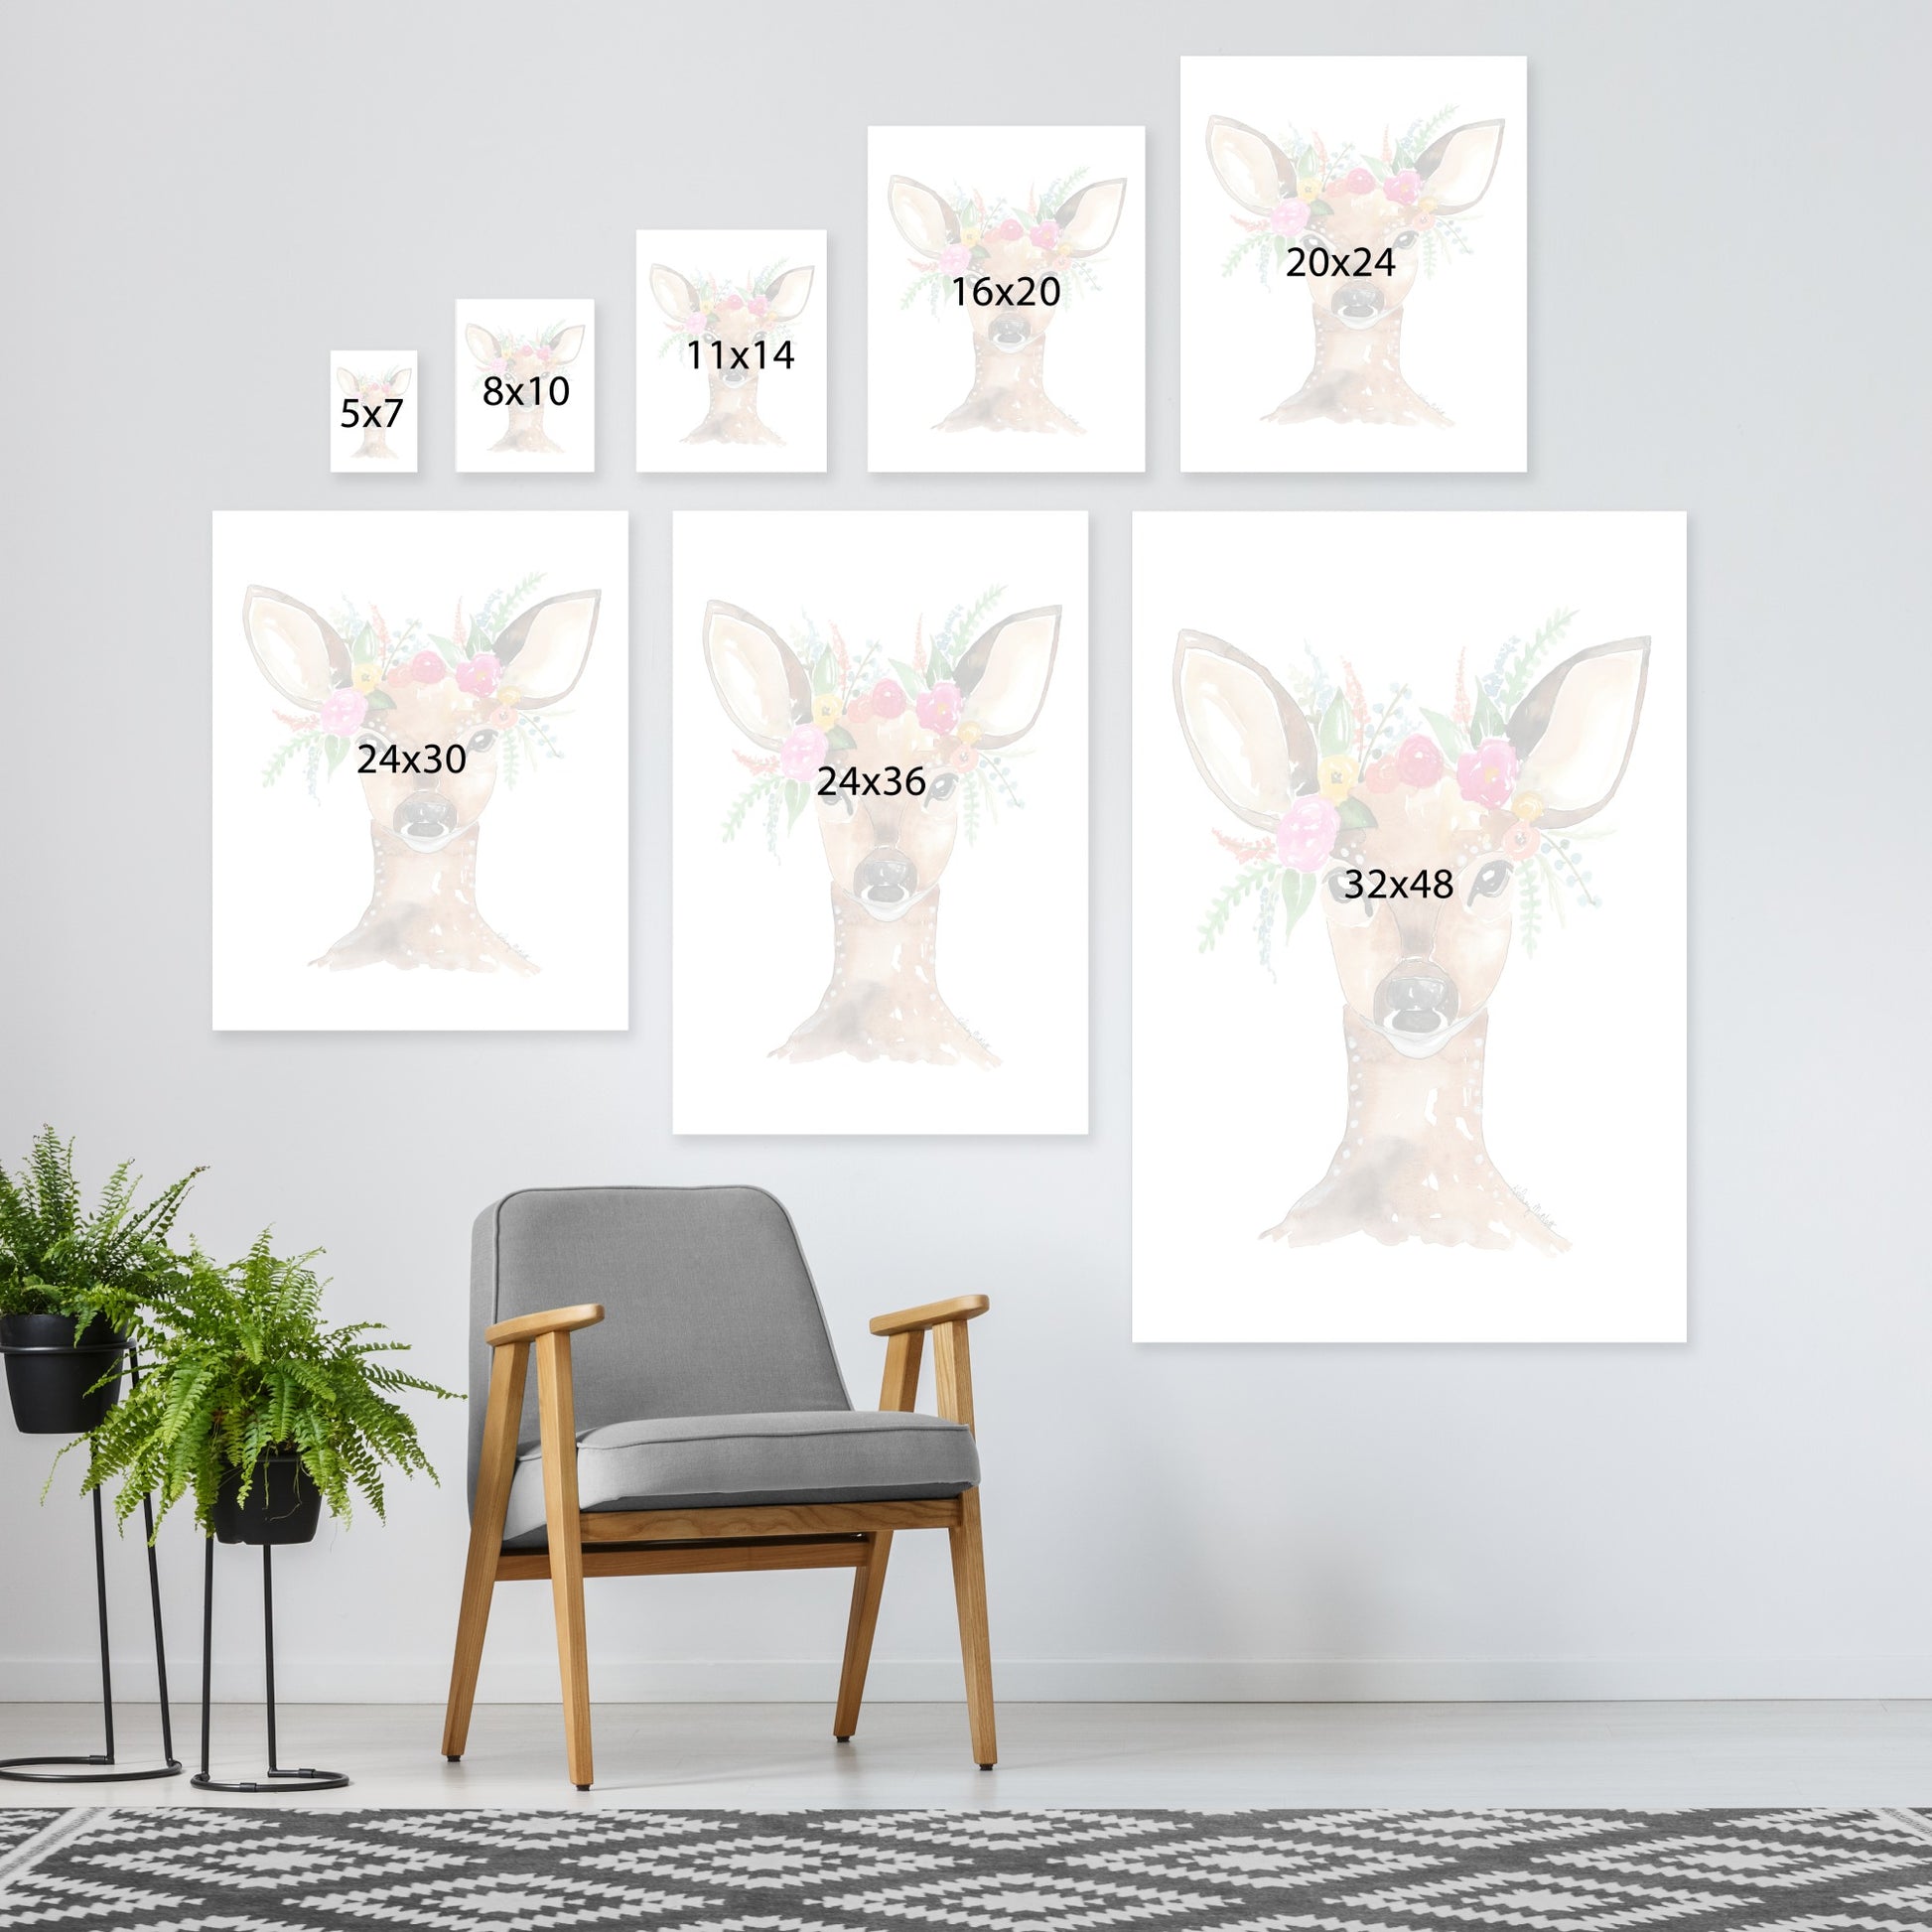 Flower Crown Deer by Kelsey Mcnatt - Wrapped Canvas - Wrapped Canvas - Americanflat